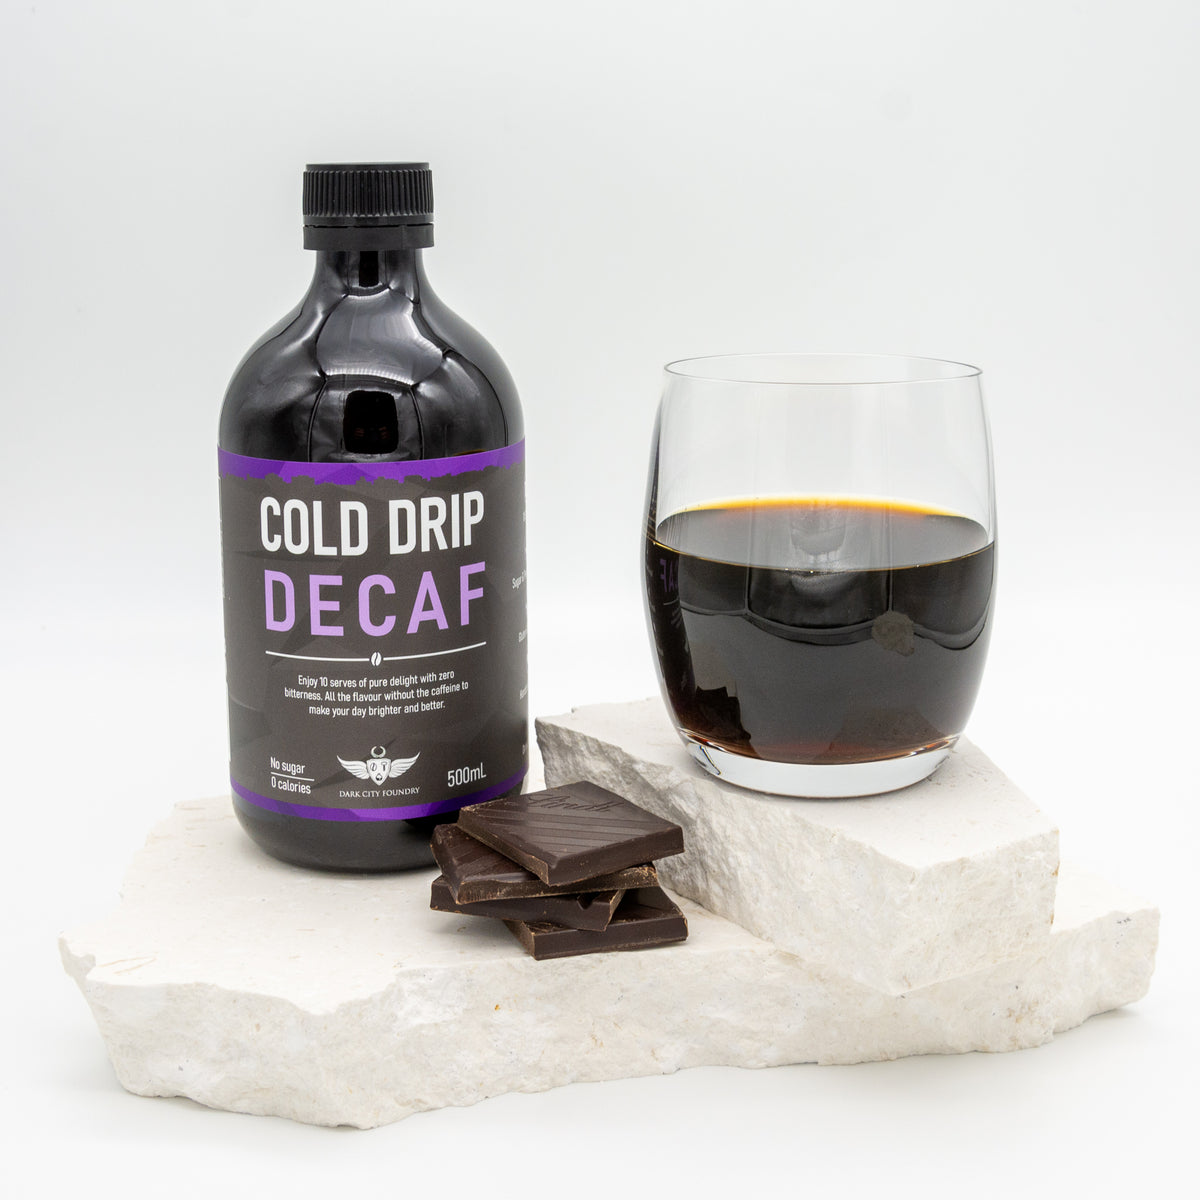 glass of decaf cold drip coffee pictured with a 500ml bottle of decaf cold drip coffee and a few pieces of chocolate